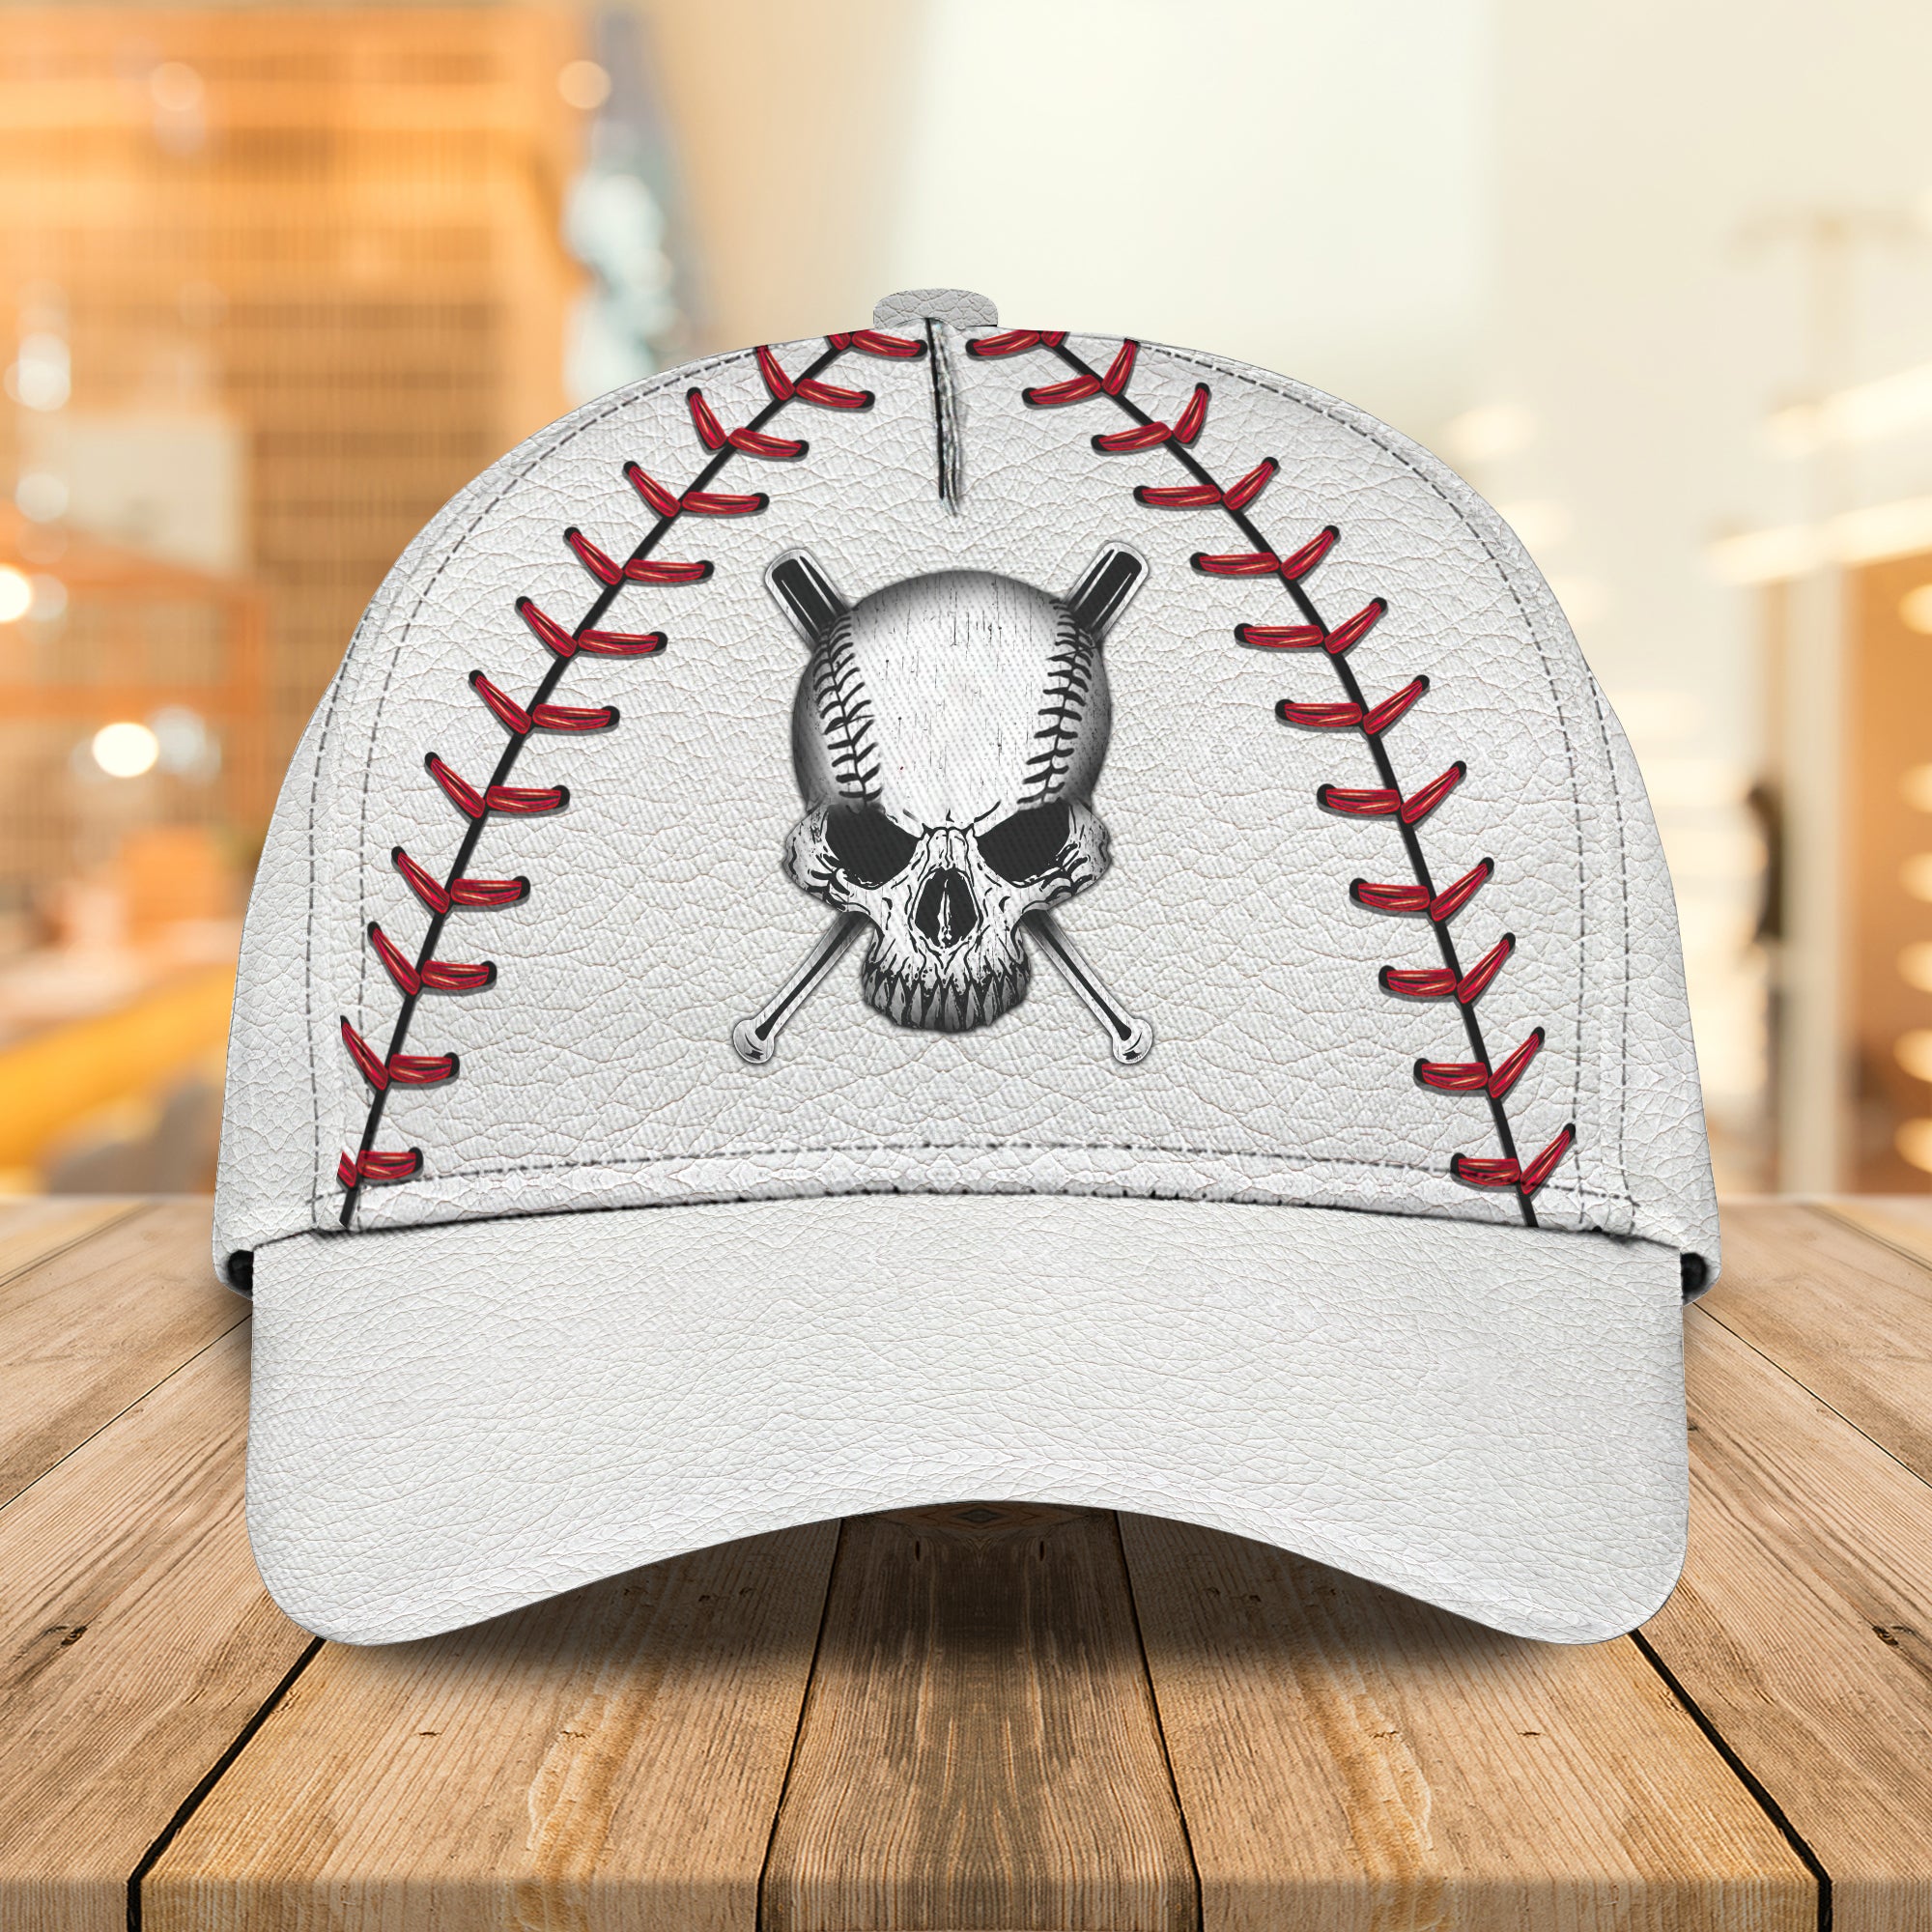 Baseball Player - Personalized Name Cap For Baseball Lover - Hez98 03